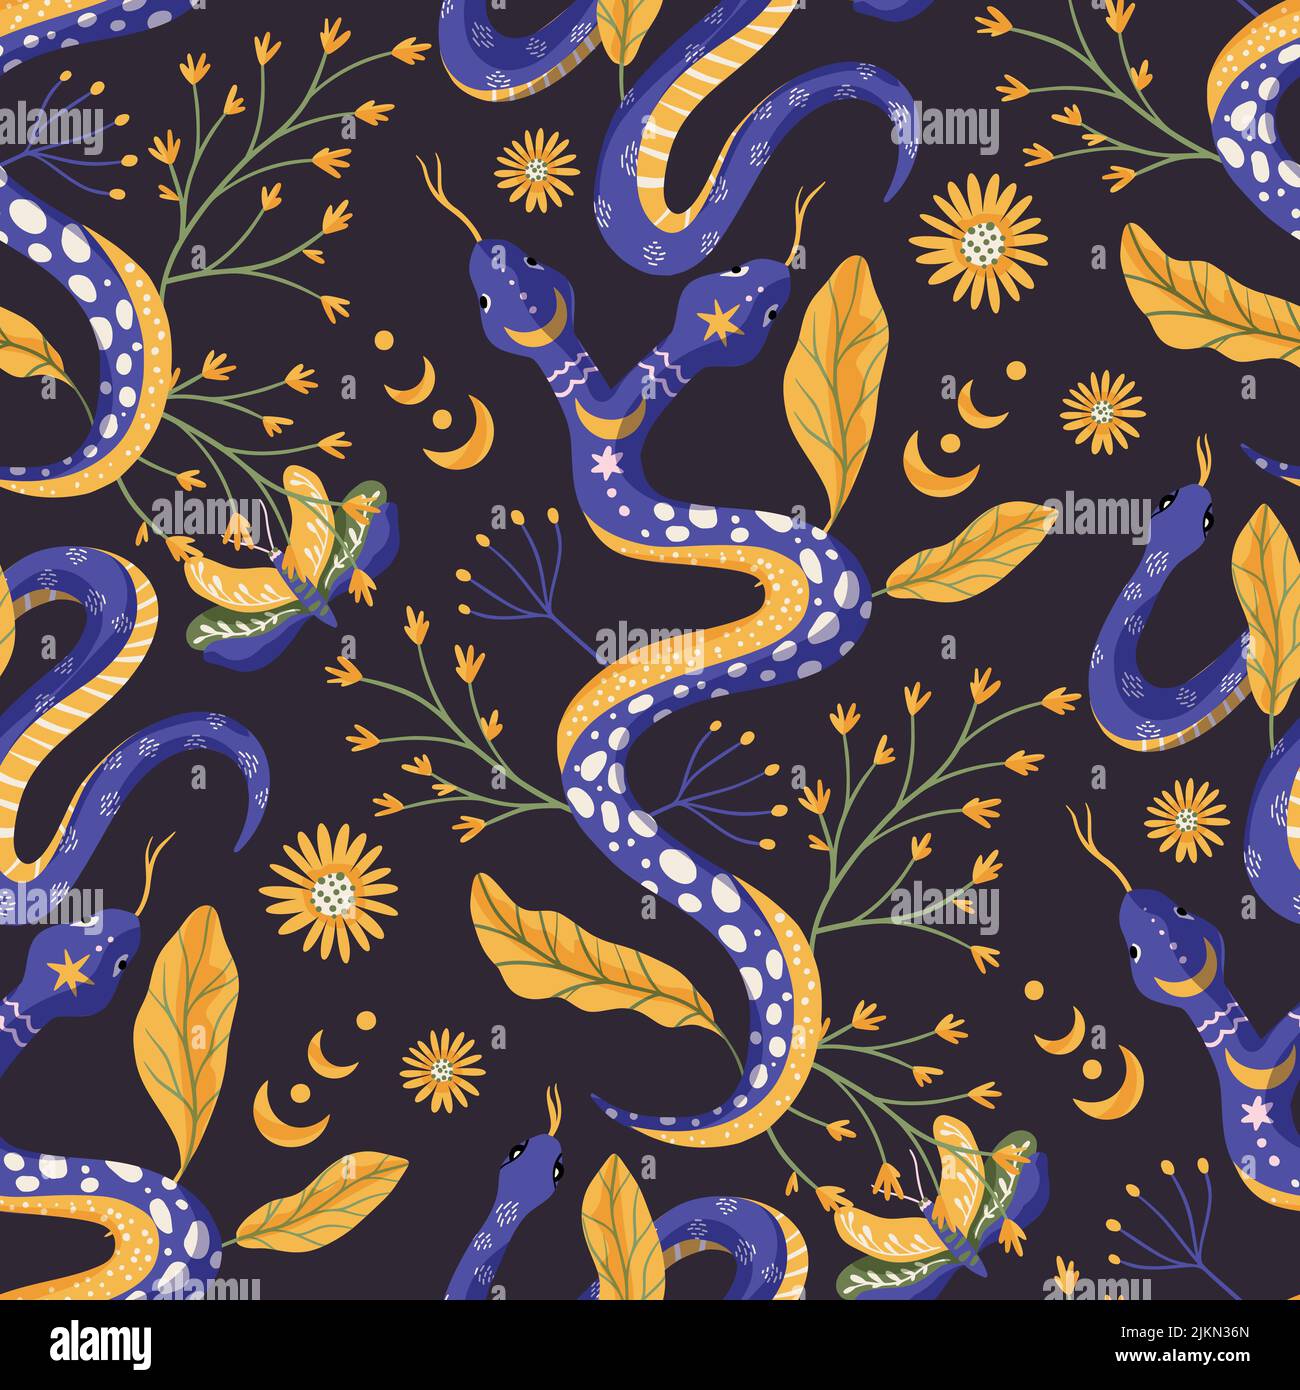 Snake and floral leaves celestial seamless vector pattern. Night magic background Stock Vector